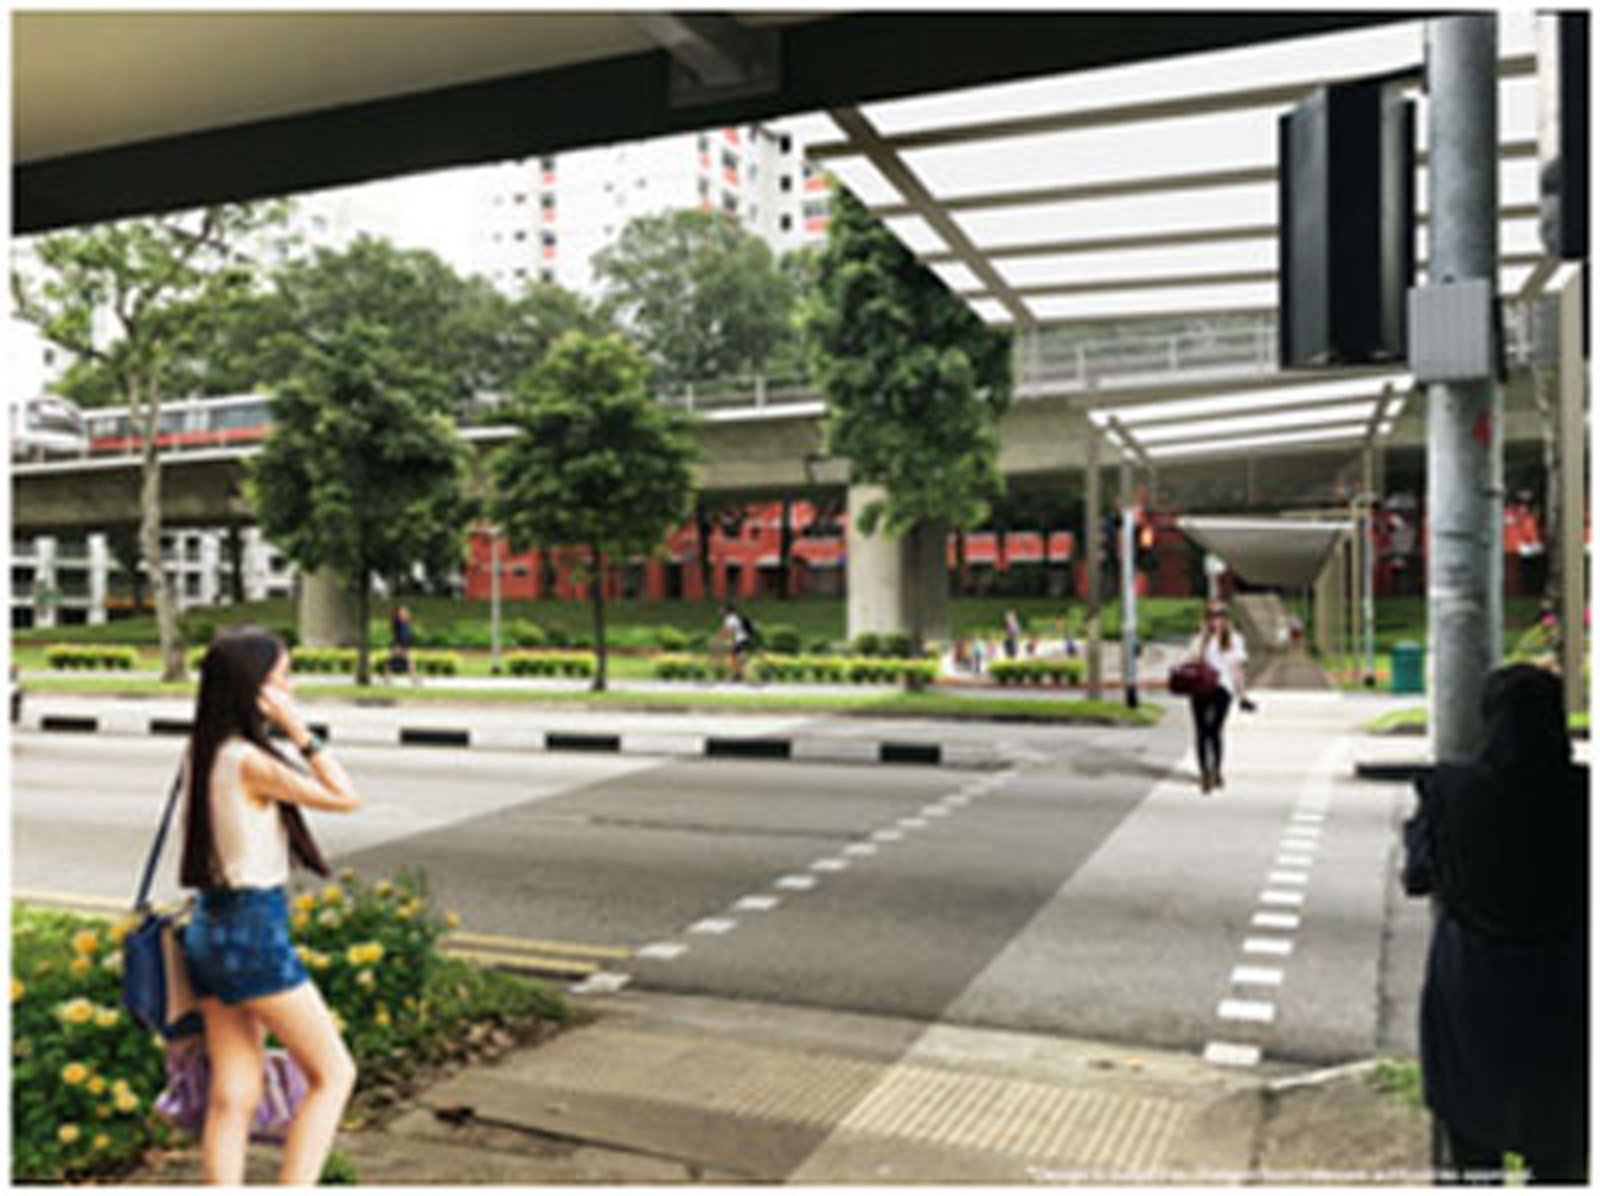 Construction of linkway across dual 2-lane roads from Blk 567 to Kranji Primary School CCK Drive